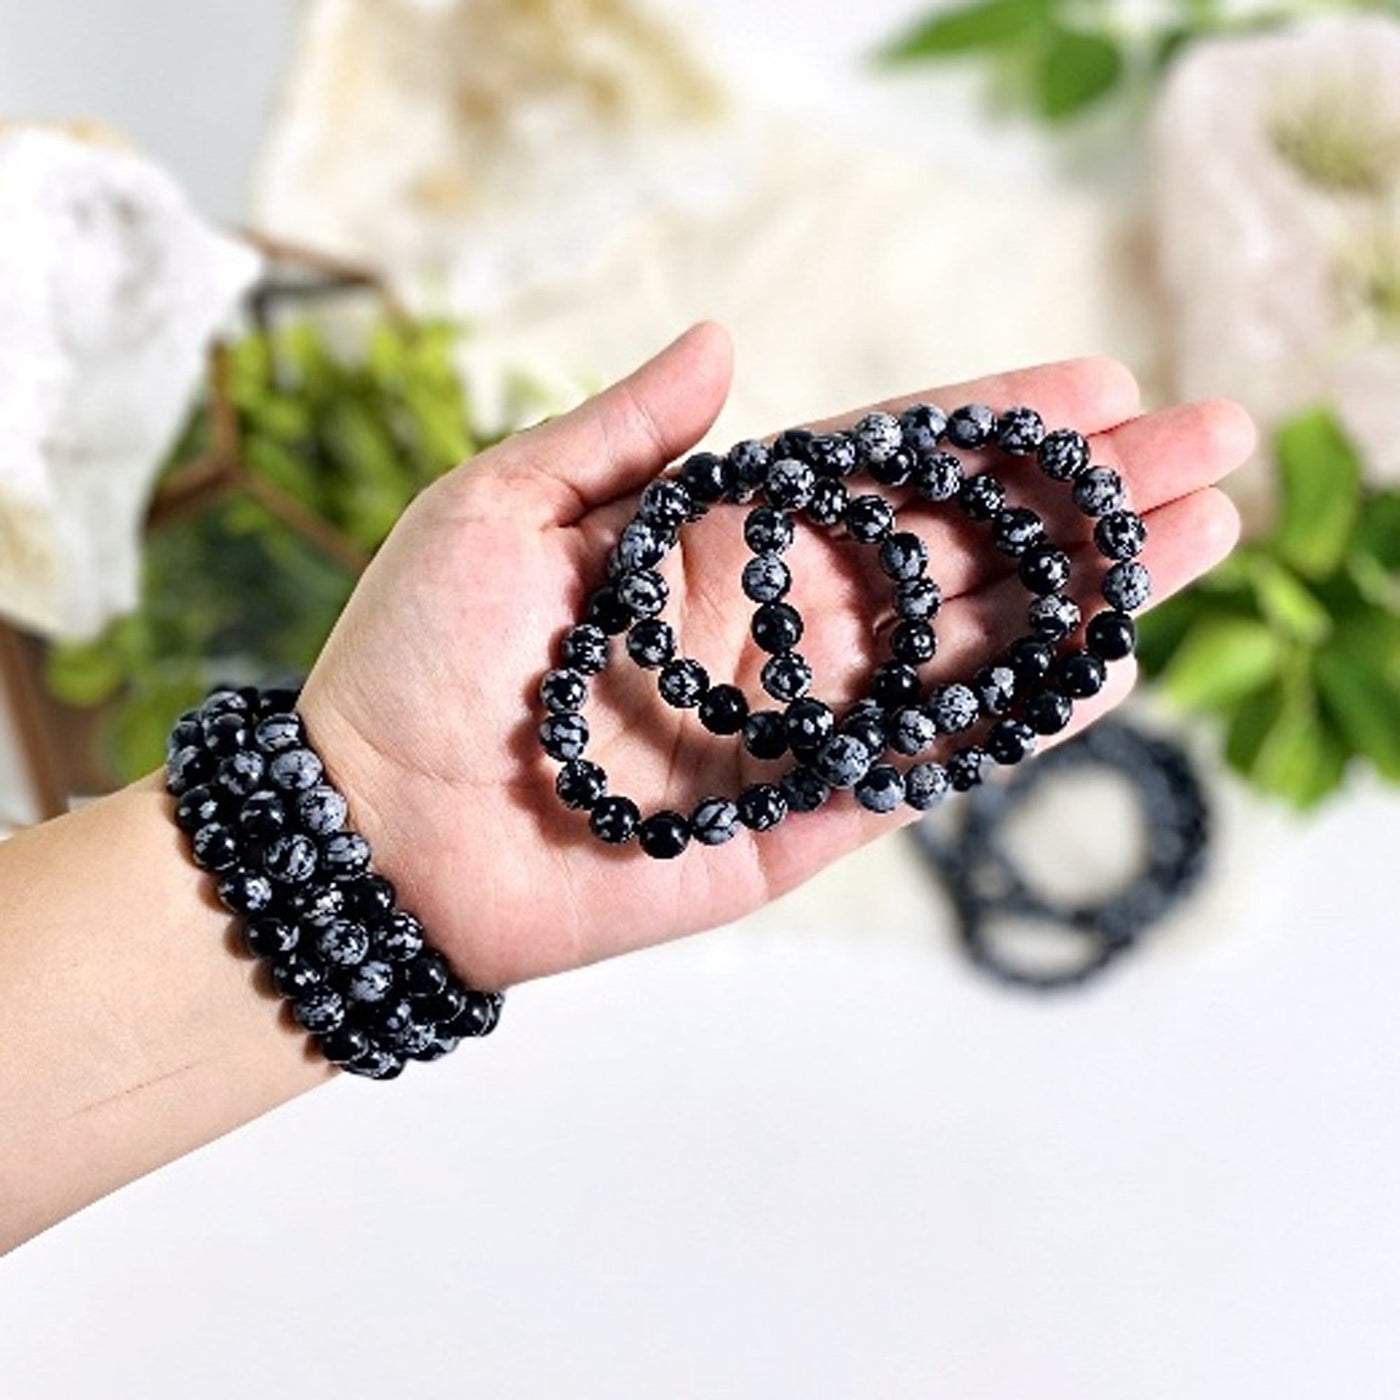 three snowflake obsidian round bead bracelets in hand and three more on wrist for size reference and possible variations